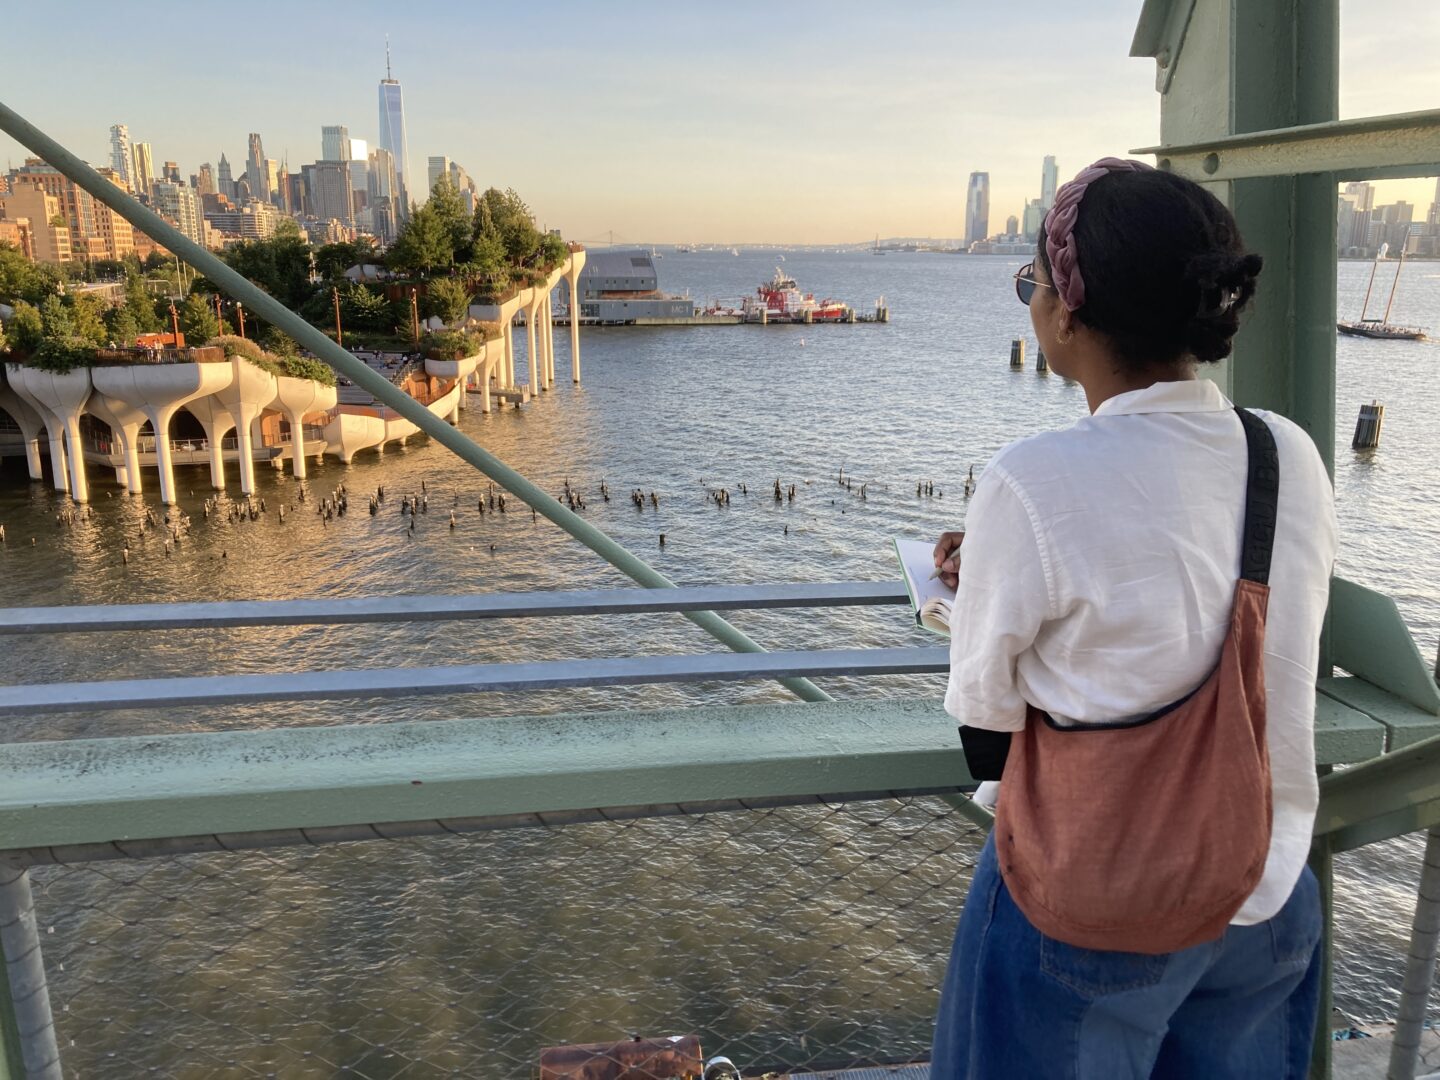 A person writing in a Nature Poetry class from the Pier 57 Rooftop Park, looking out toward Little Island and Lower Manhattan